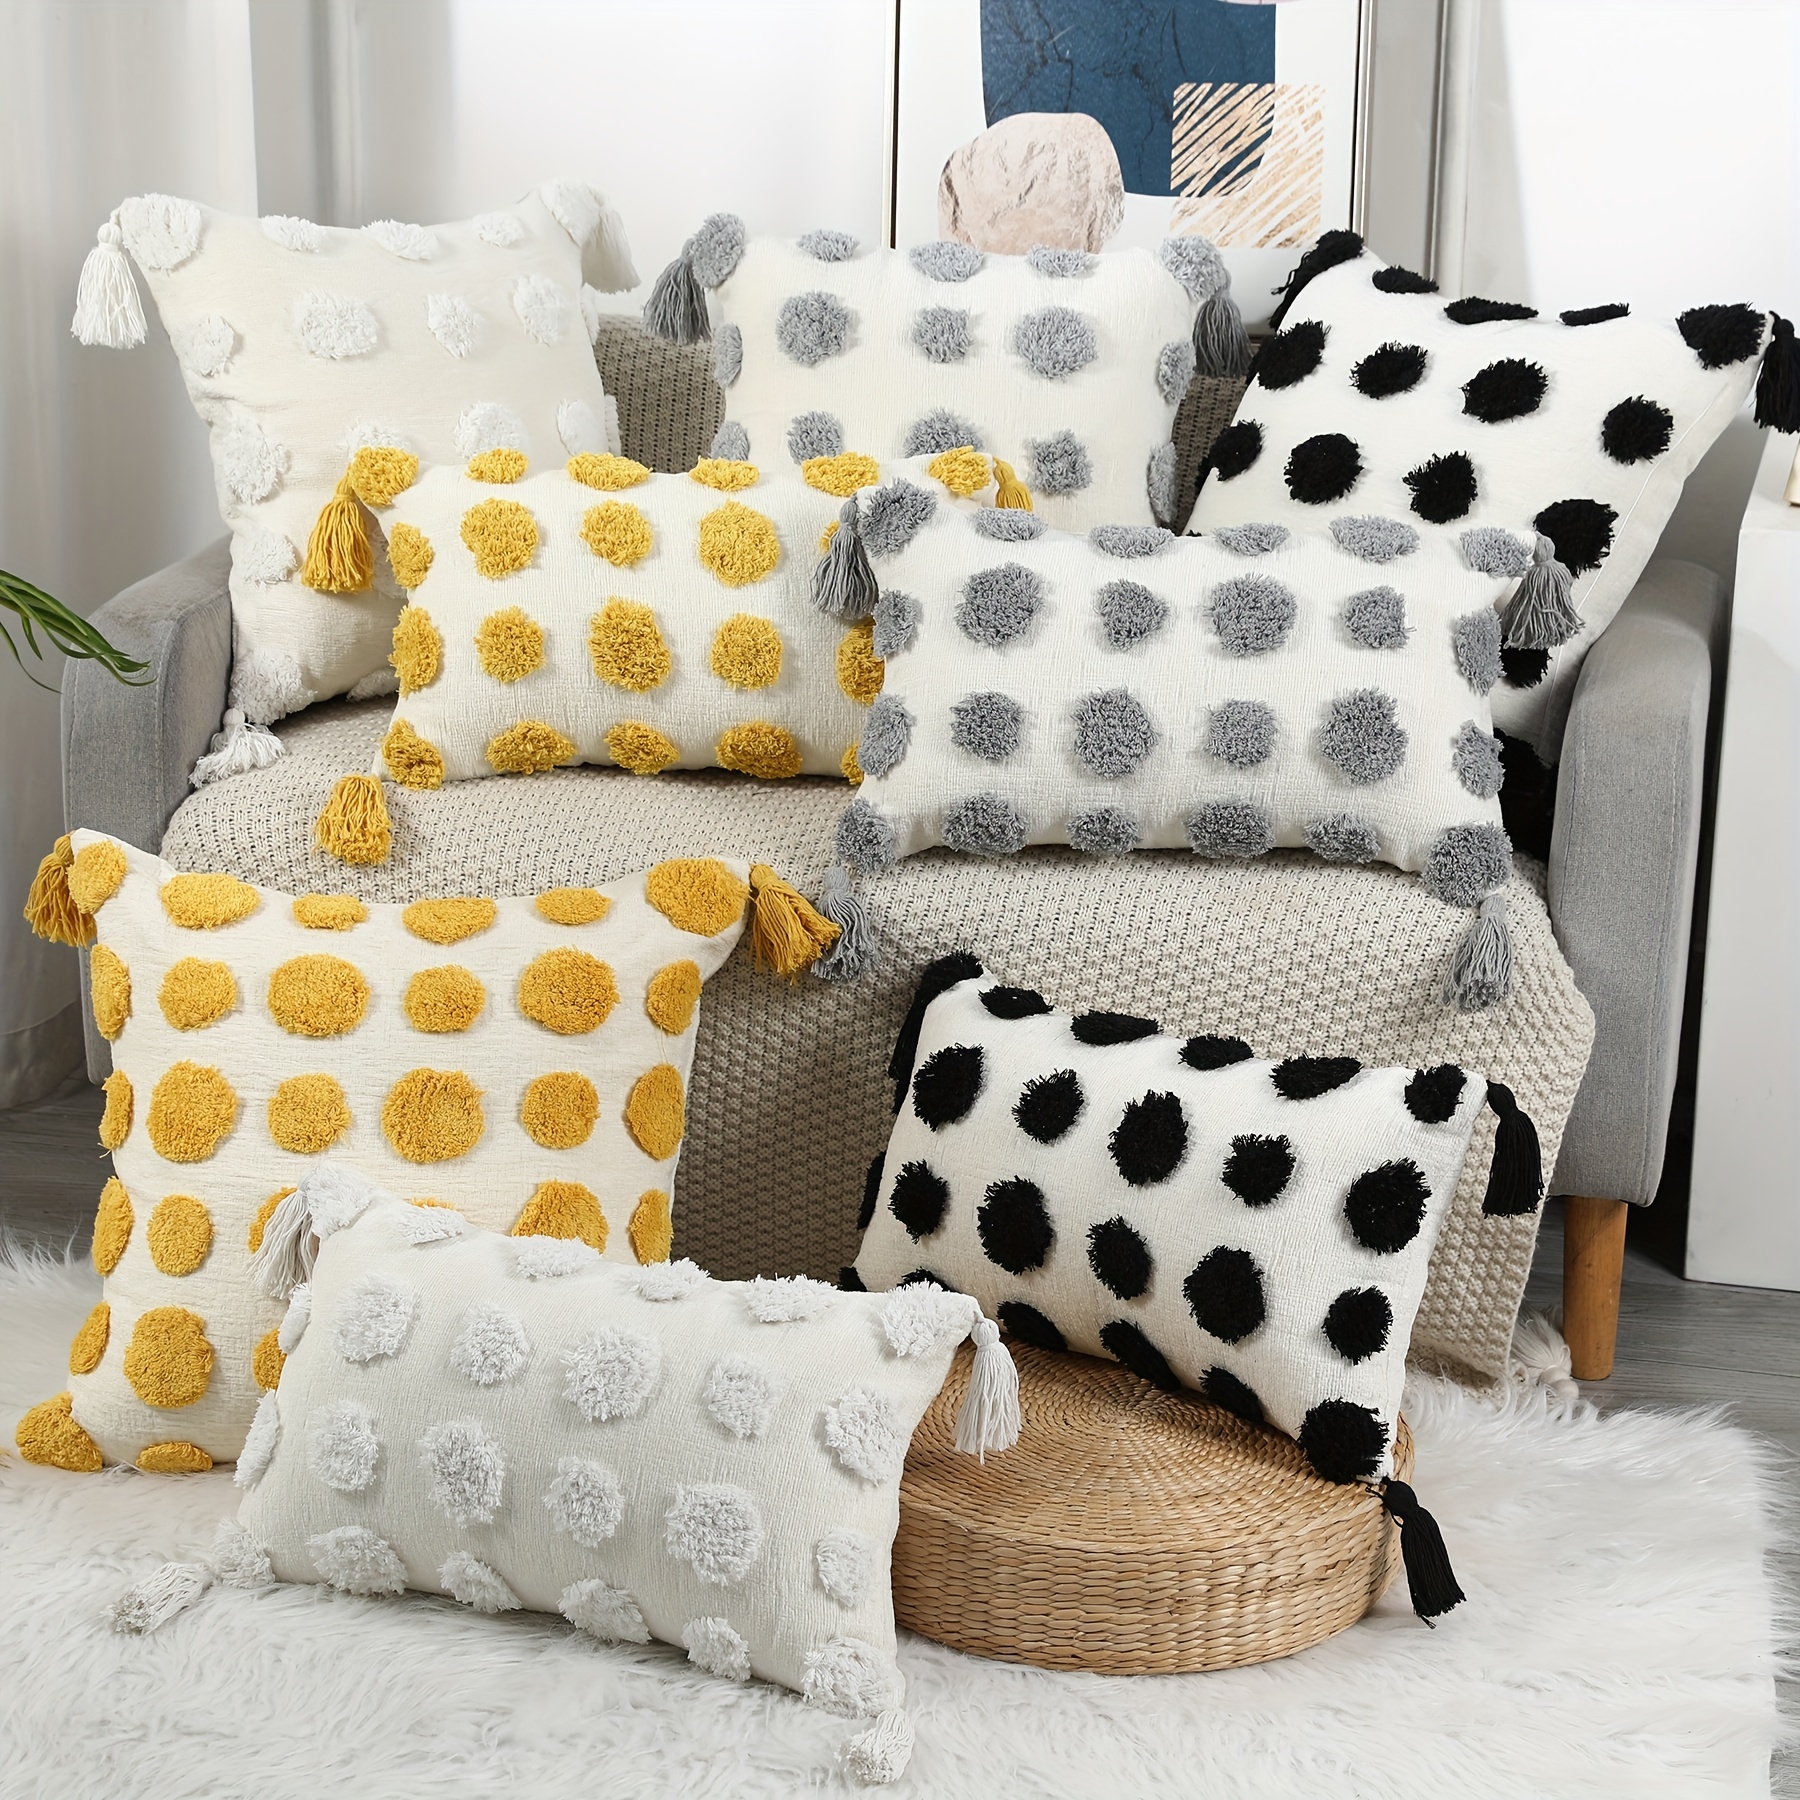 2pcs Houndstooth Chair Cushion Set, Modern Style, Includes 1 Chair Cushion  And 1 Pillowcase Without Filling, For Summer Office Use